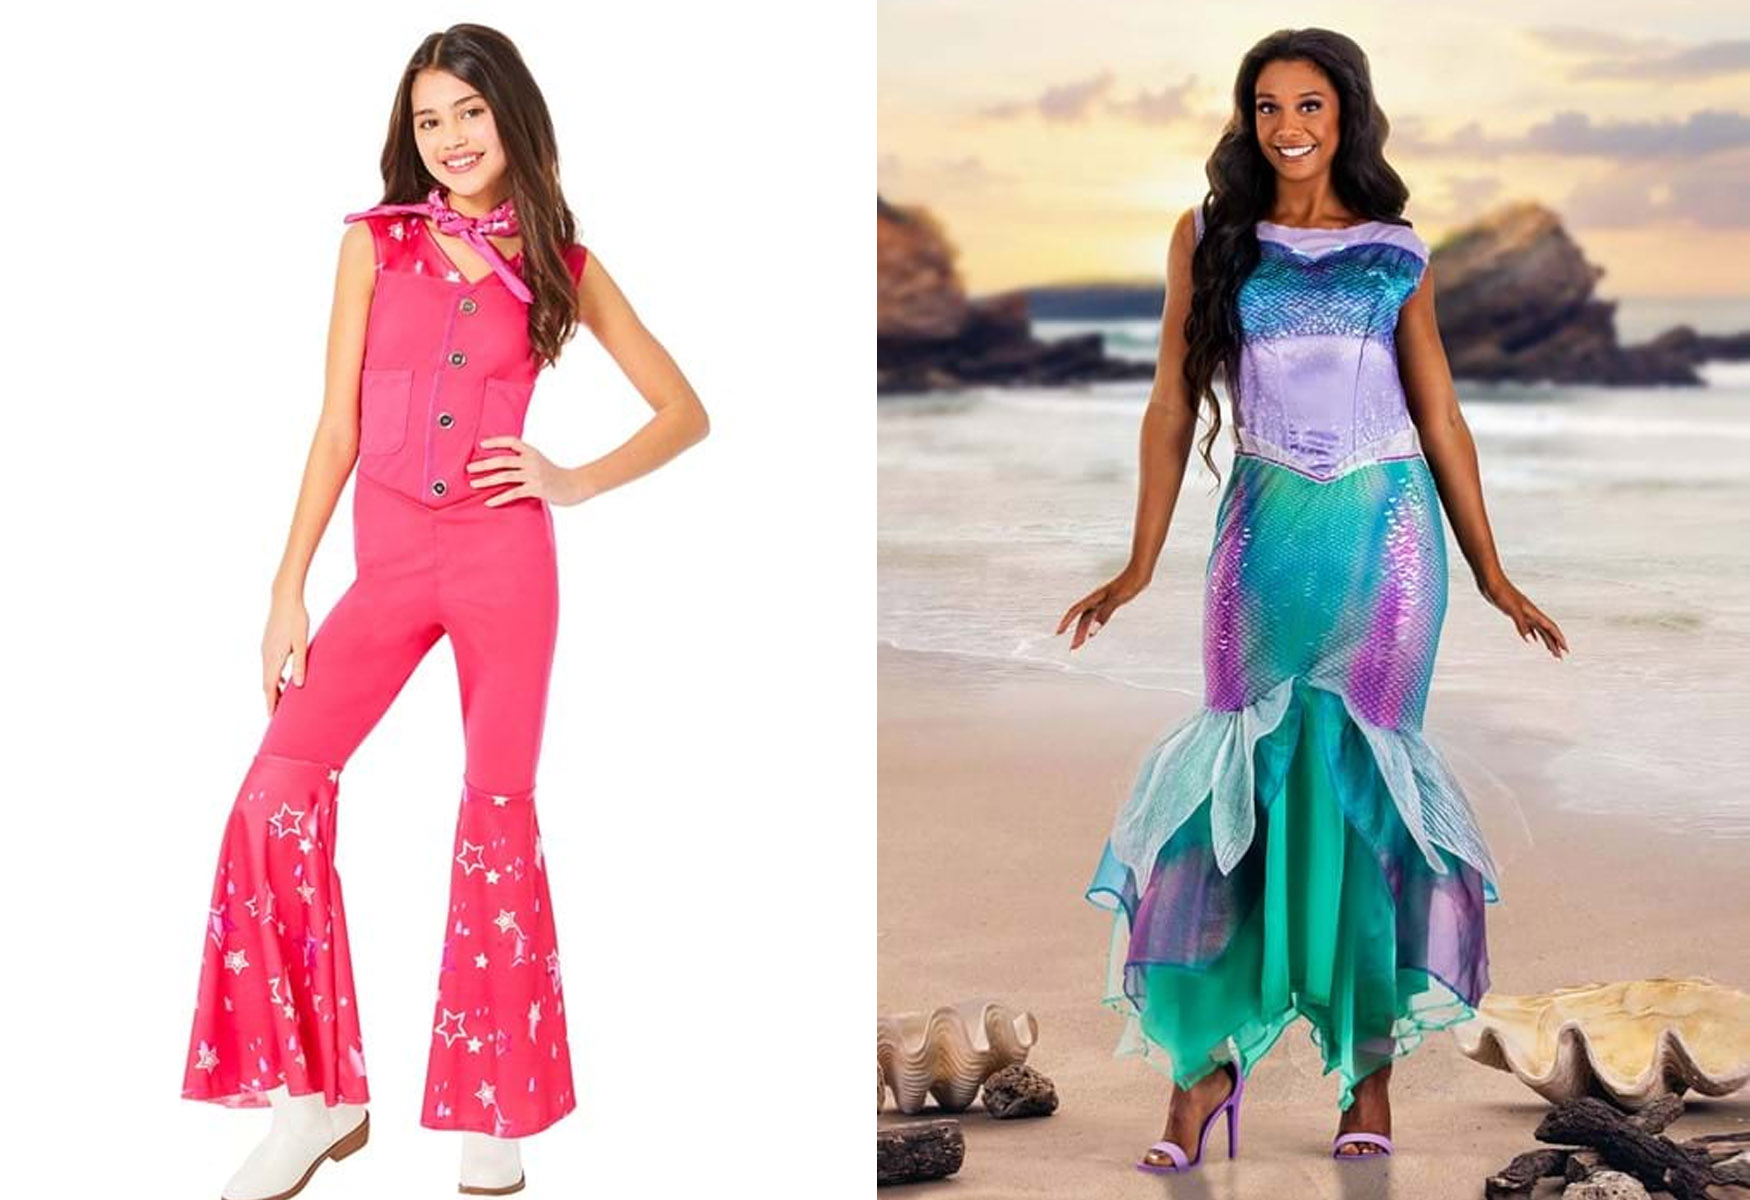 Barbie And Little Mermaid Halloween Costumes Soar In Popularity This Year